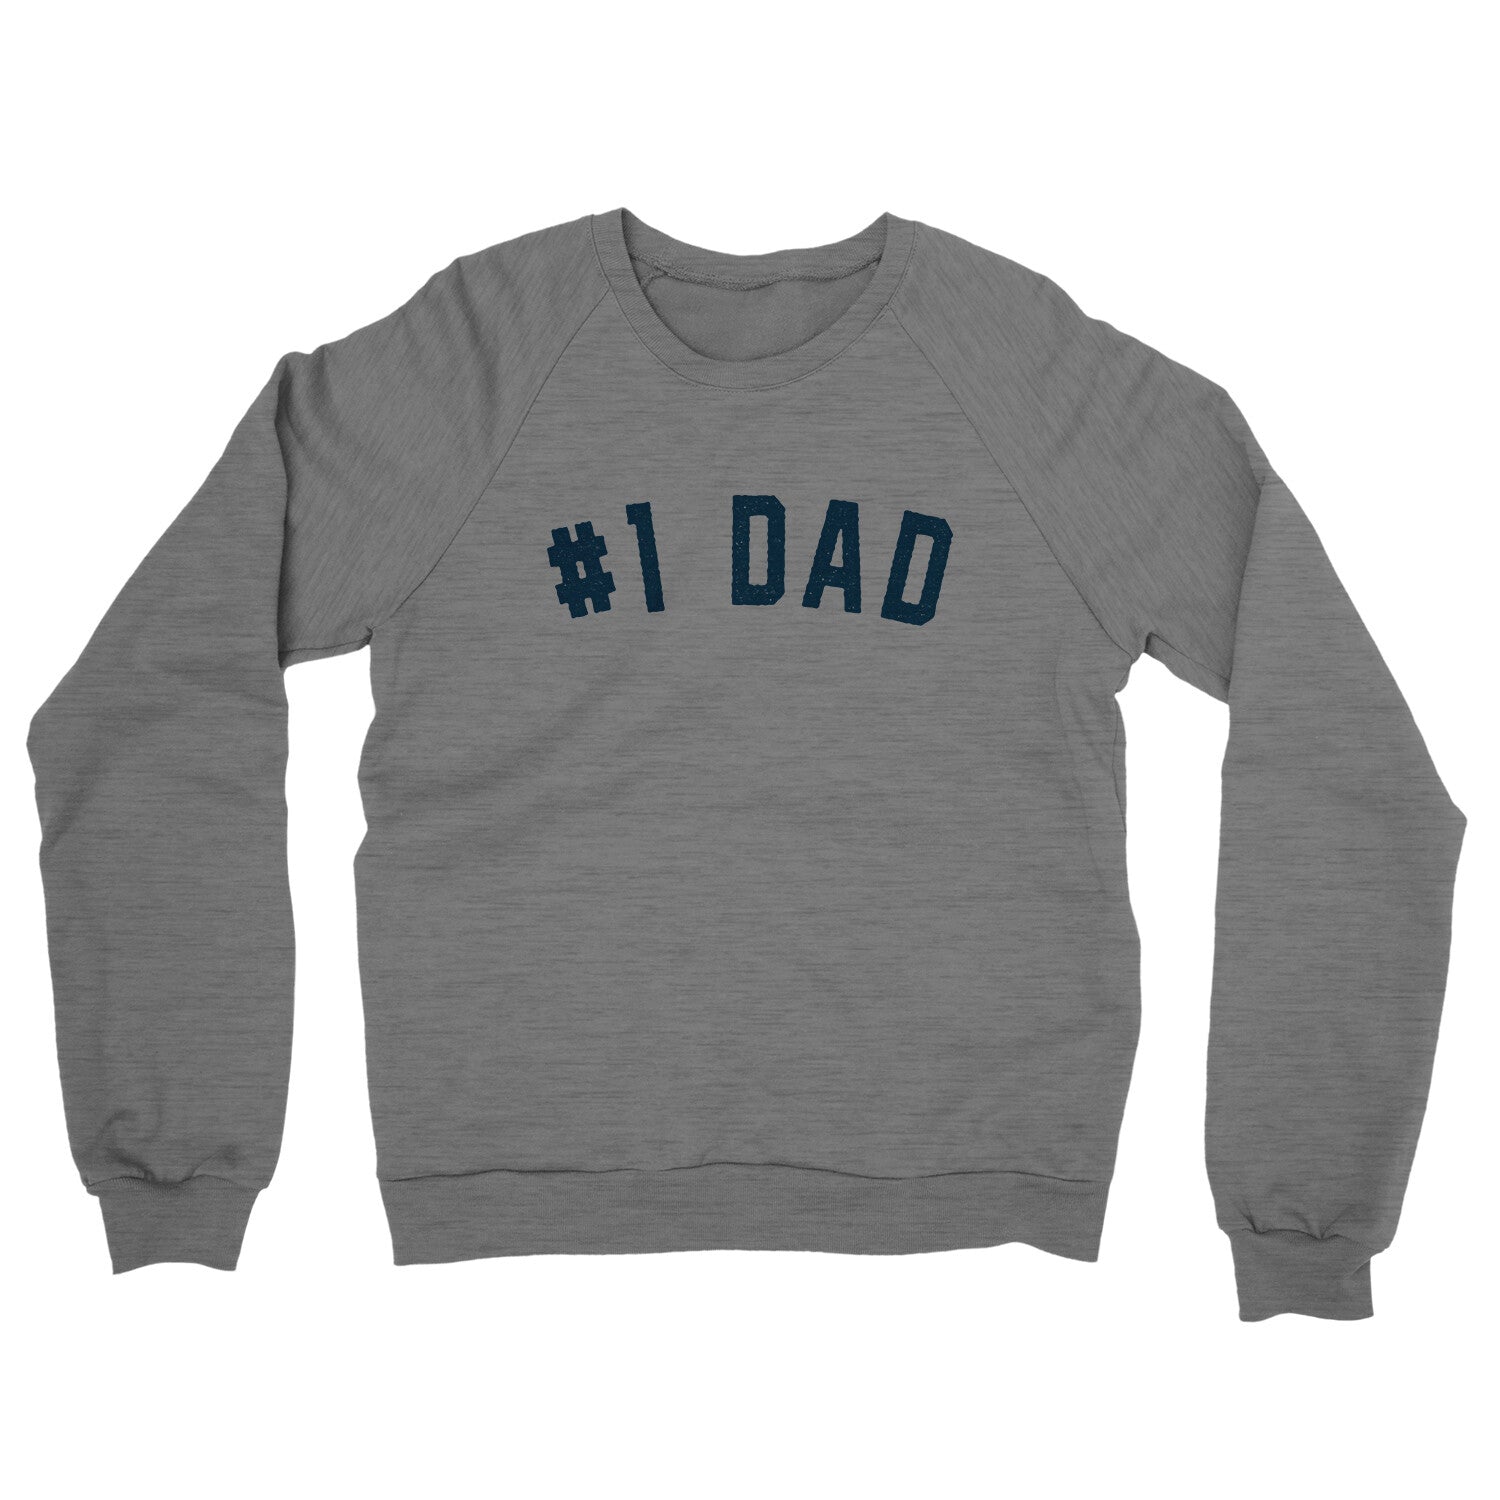 Number 1 Dad in Graphite Heather Color